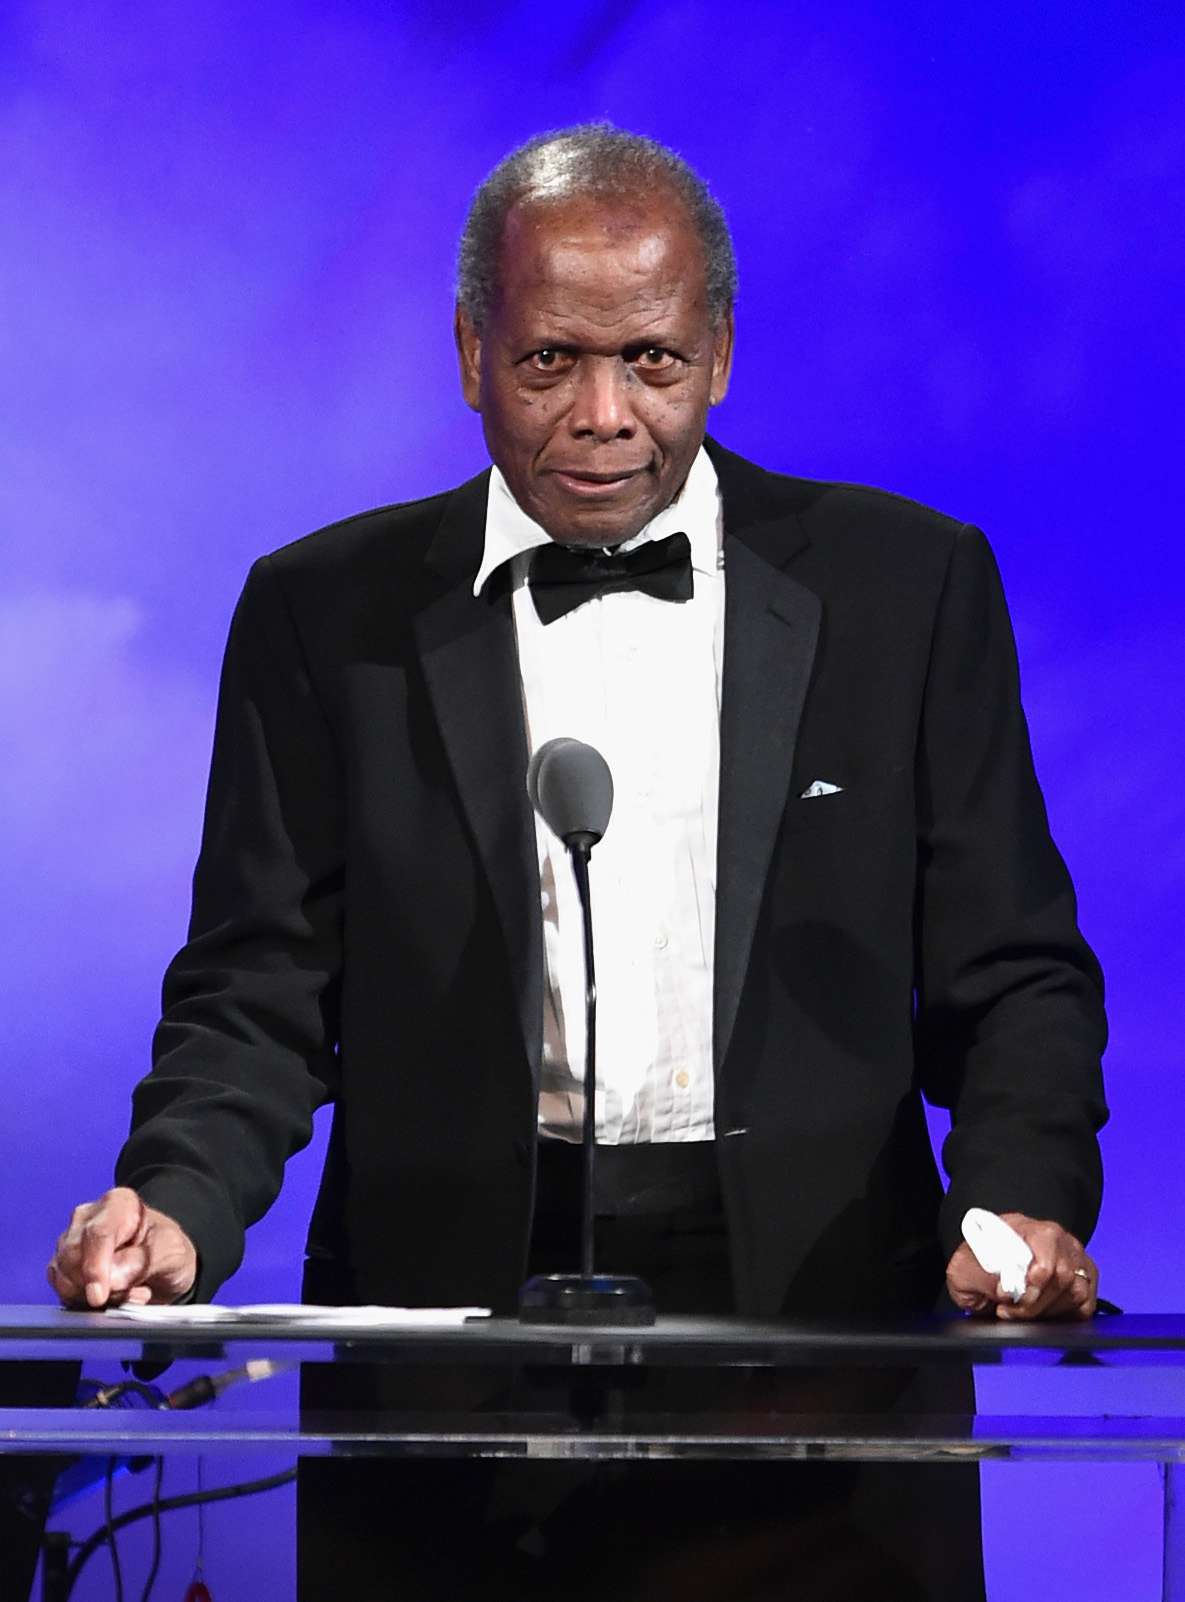 Sidney Poitier, 89, Says His 49-Year Marriage and His Family Are His Greatest Achievement - PEOPLE.com